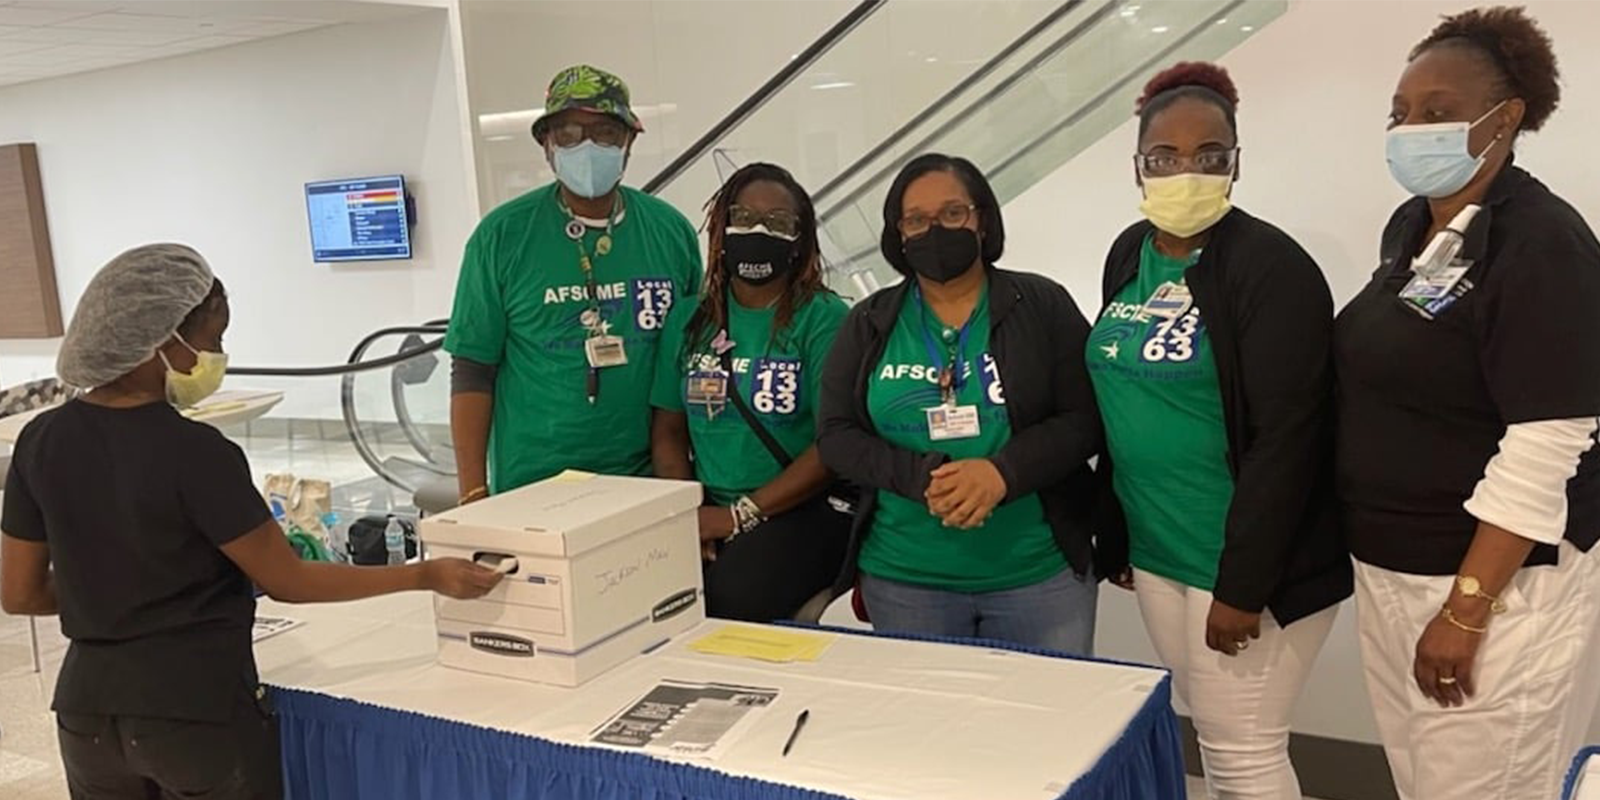 New contract recognizes the work of South Florida members throughout the pandemic